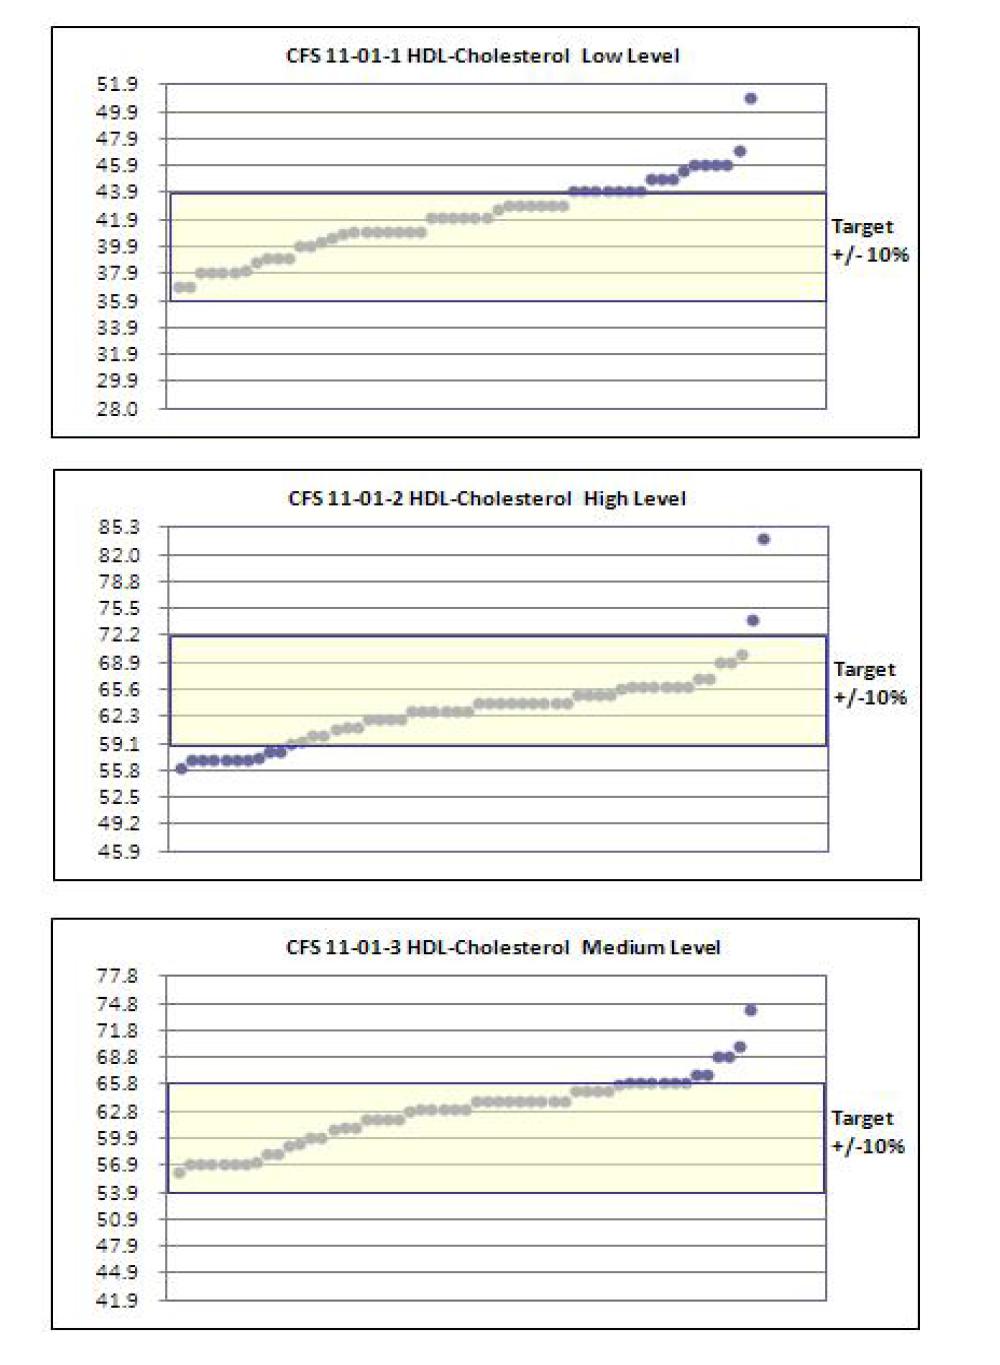 Bias from CDC target in each participating laboratory for total cholesterol